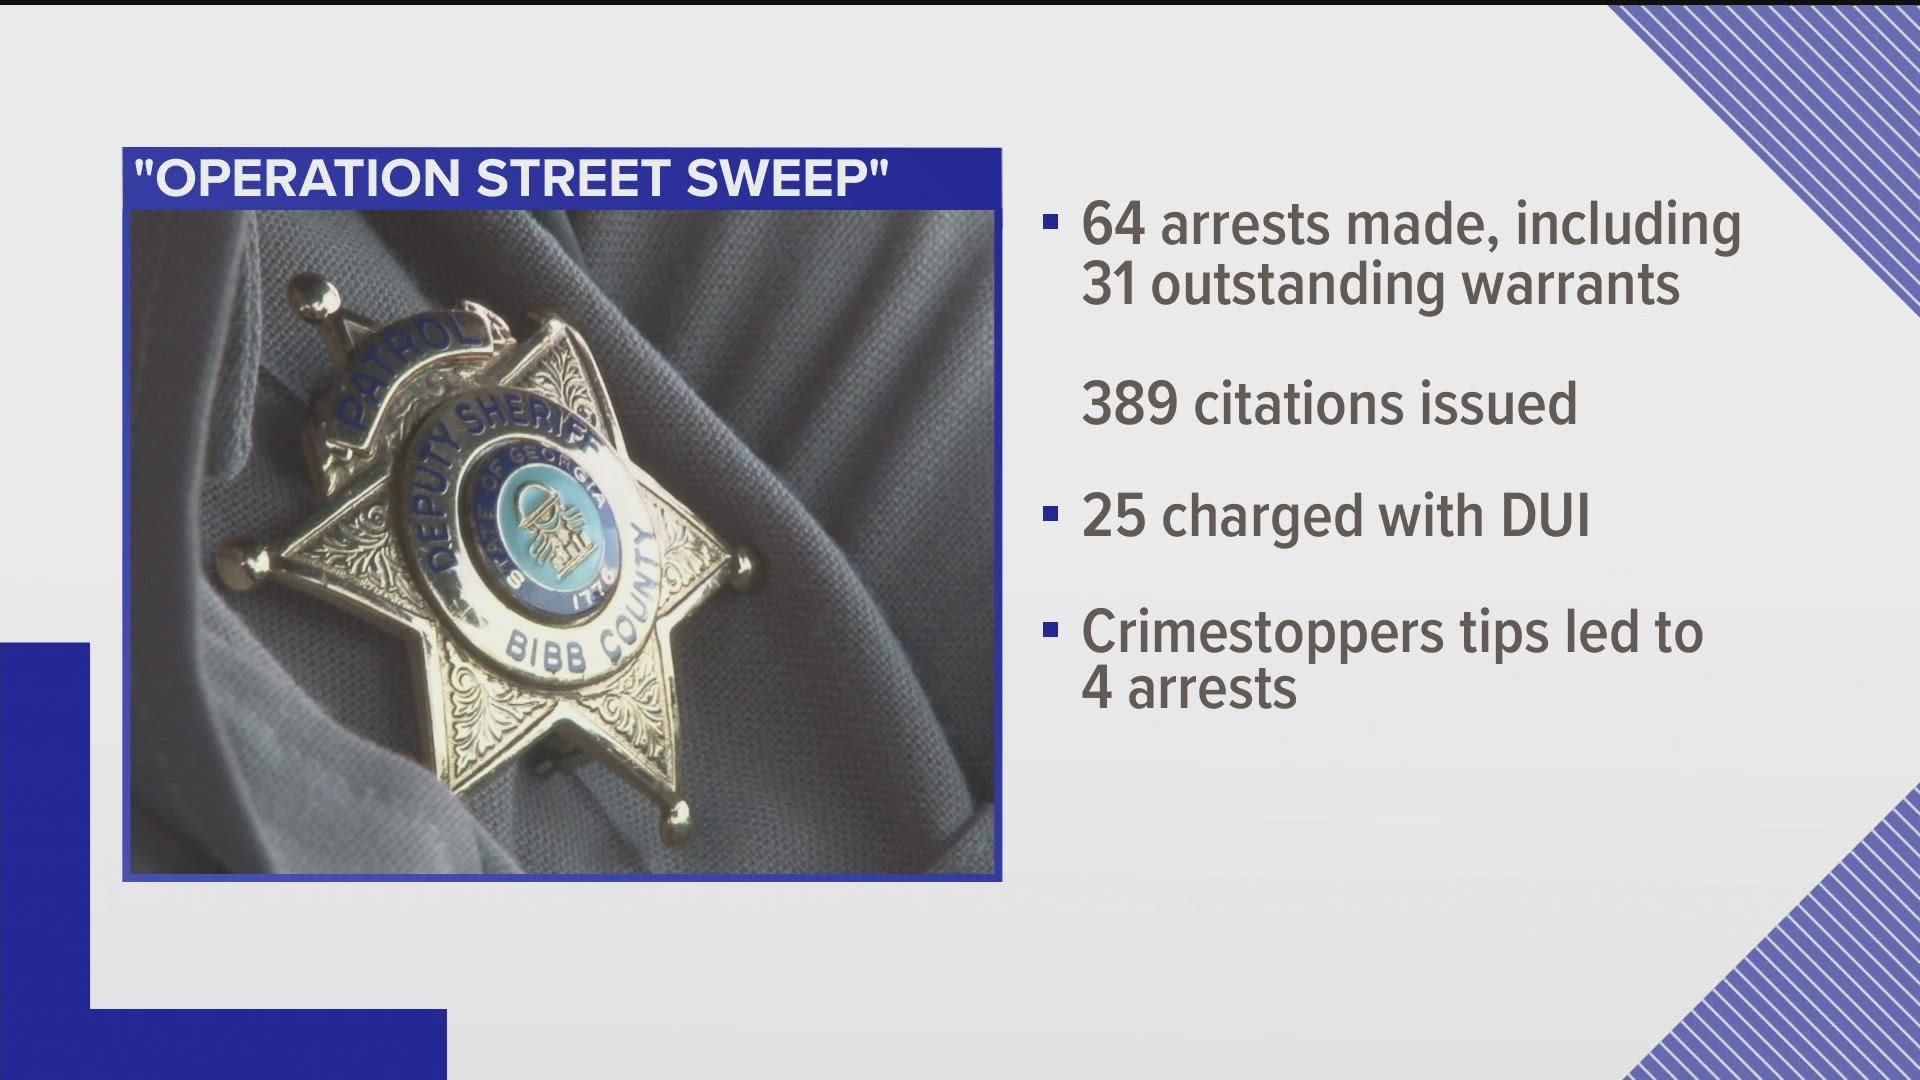 "Operation Street Sweep" took place from August 27 through August 29 and was the sheriff's office's latest effort in stopping crime in the county.